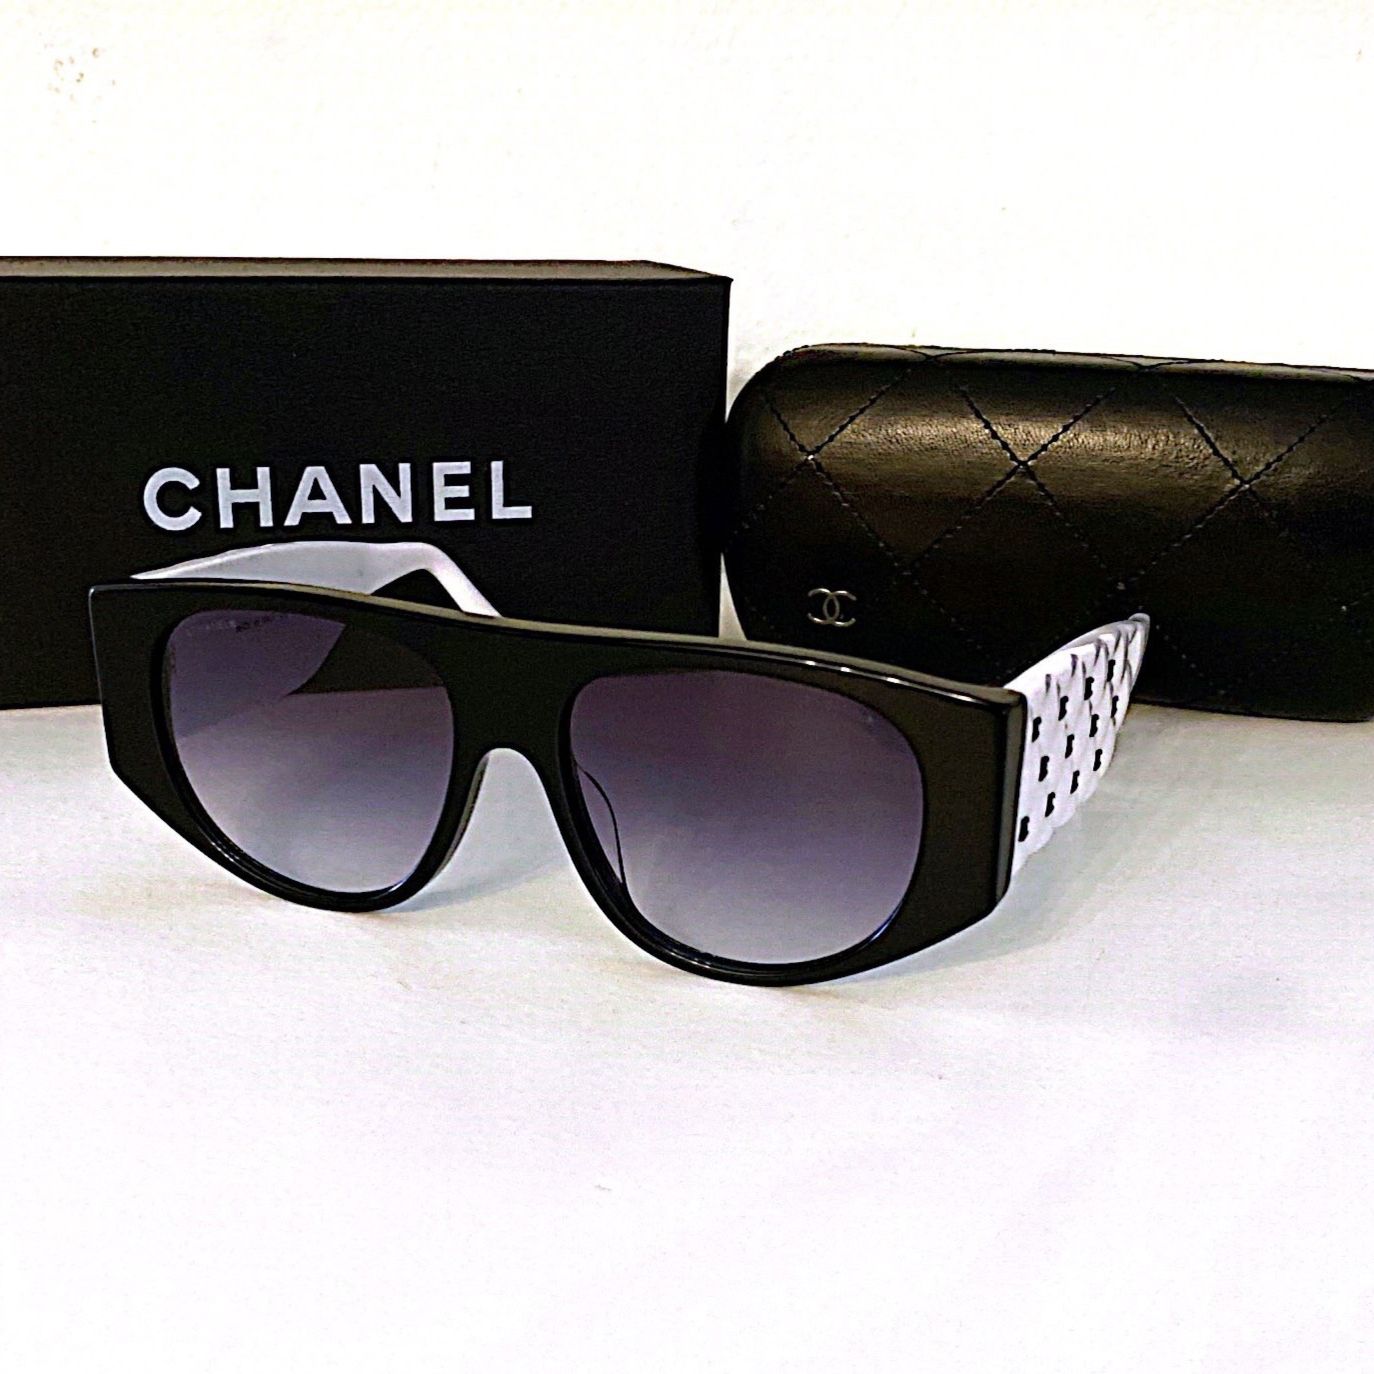 Chanel Sunglasses for Sale in Big Bear, CA - OfferUp